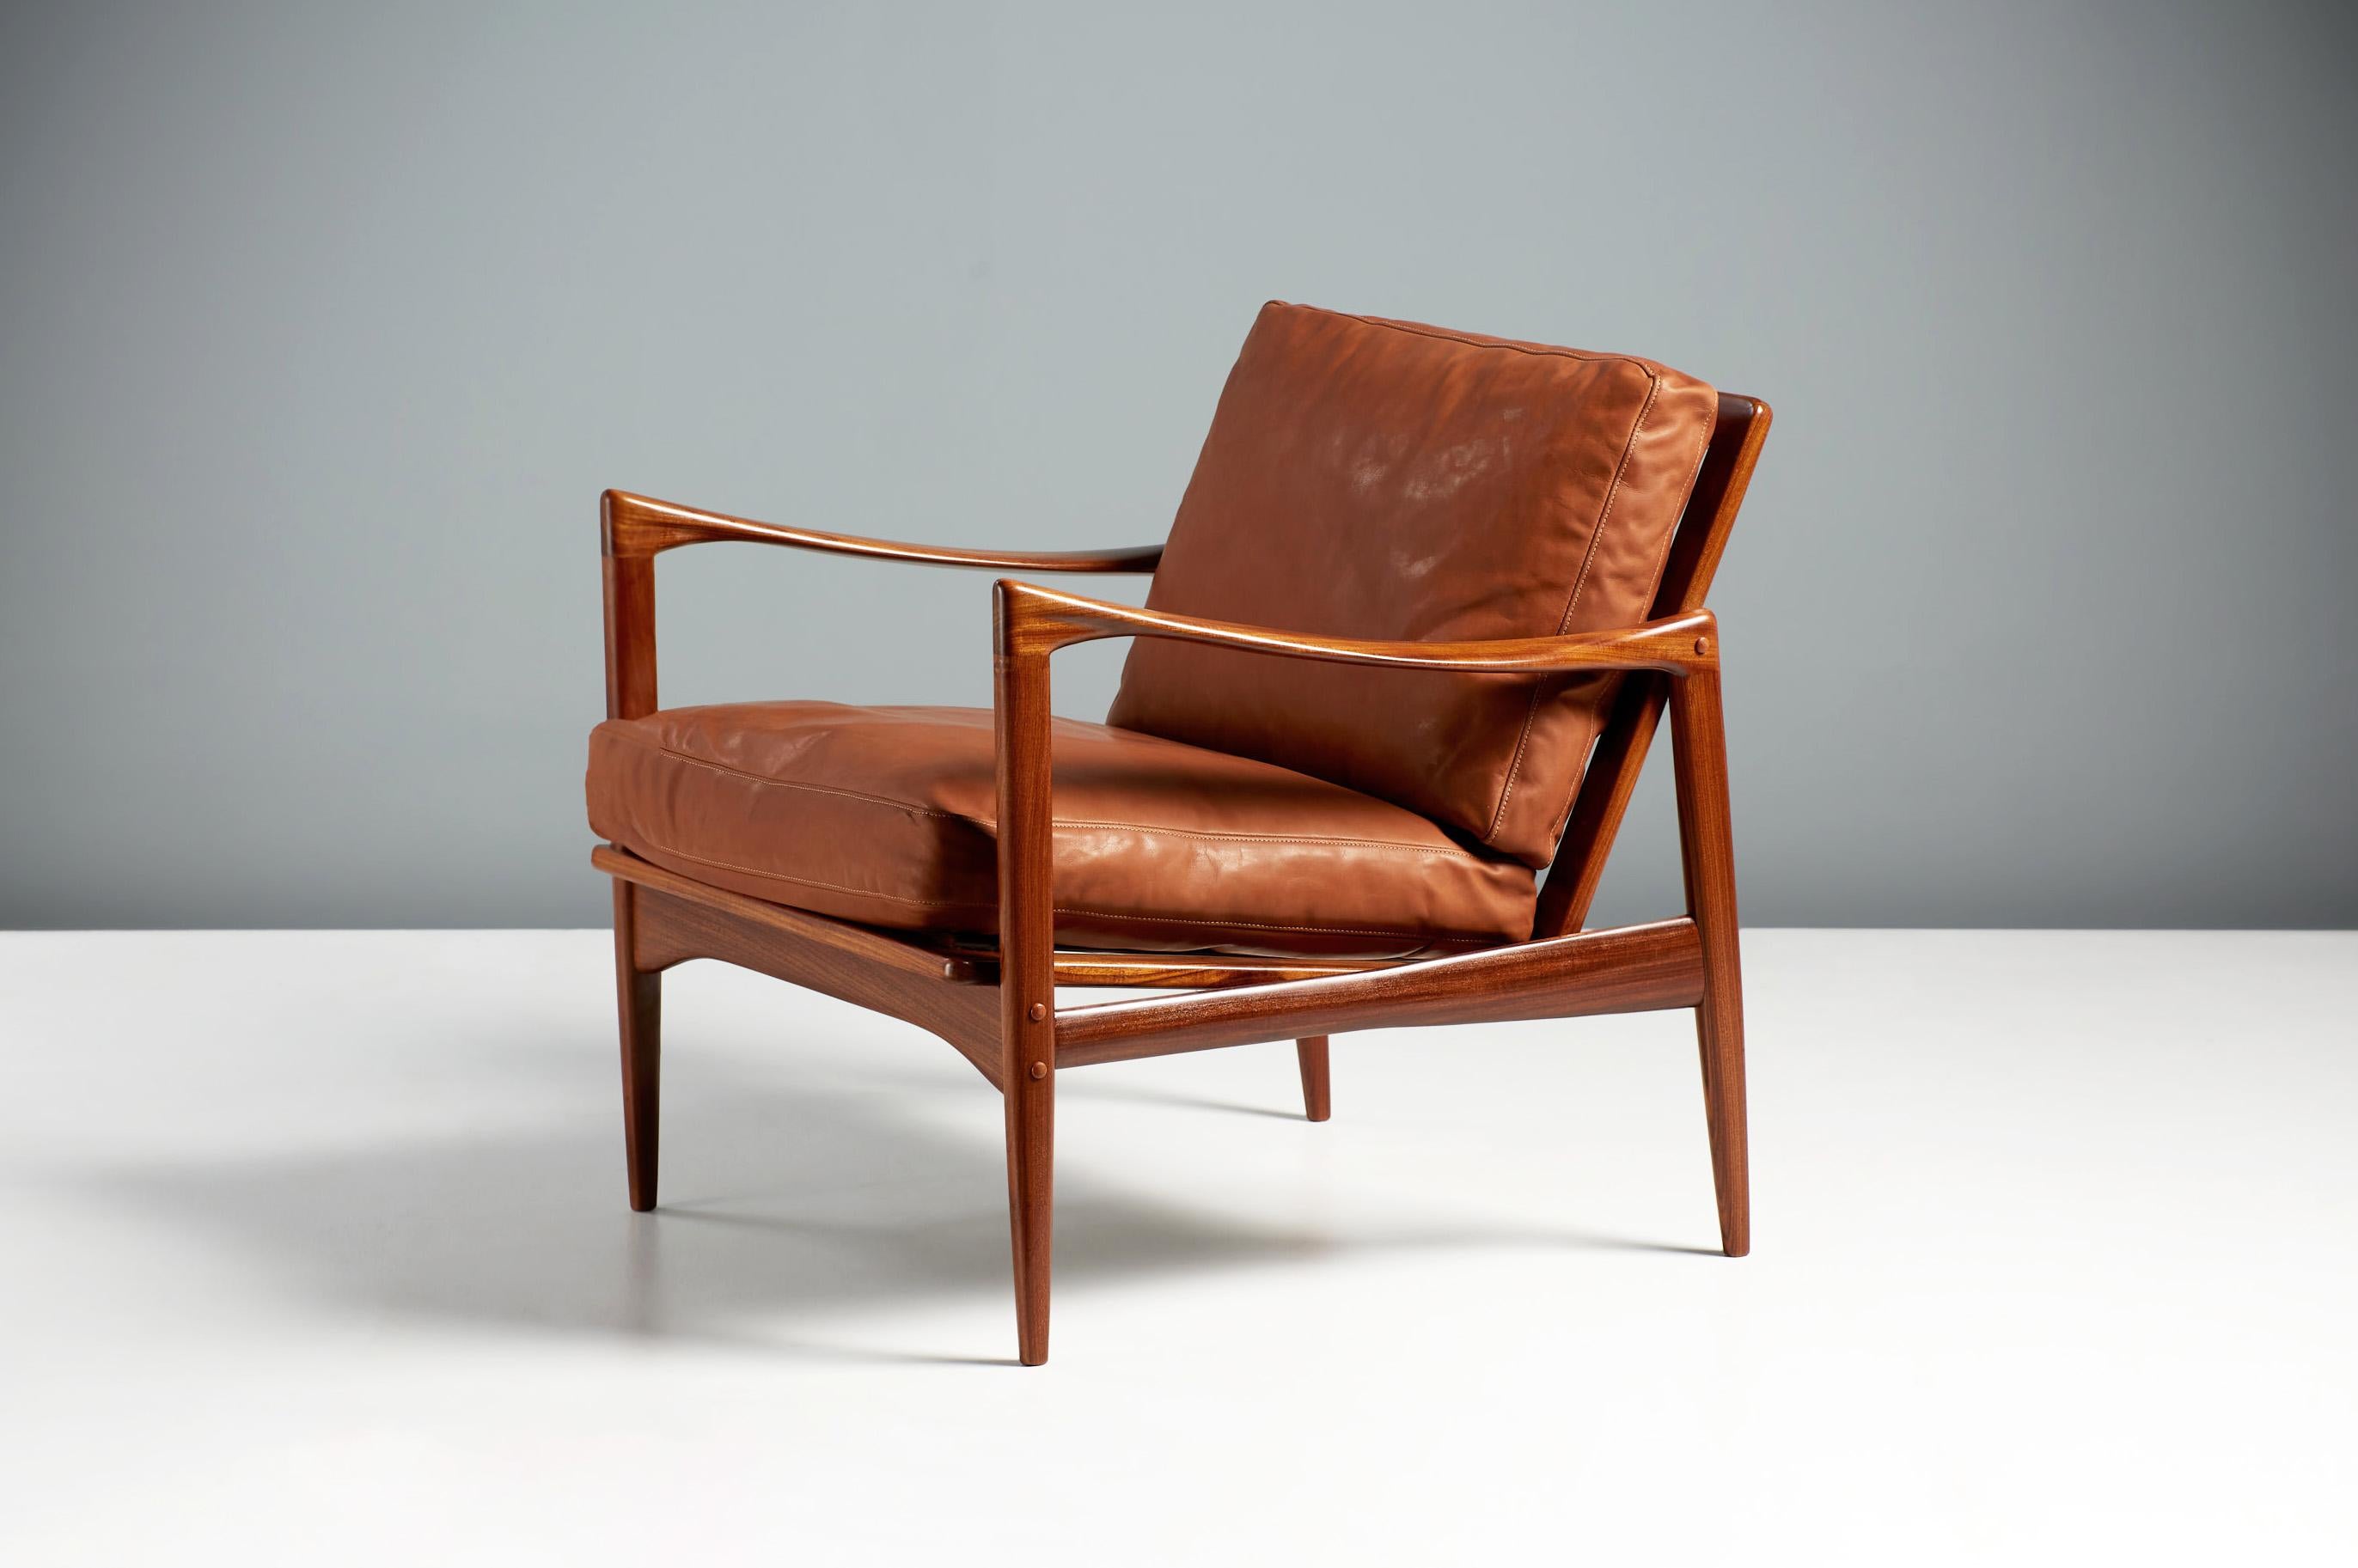 Pair of Ib Kofod-Larsen Candidate Chairs, circa 1960.

A pair of Afromosia African teak 'Kandidaten', lounge chairs produced by Olof Perssons Fatoljindustri (O.P.E.) in Jonkoping, Sweden circa 1960. The new feather filled cushions are covered in